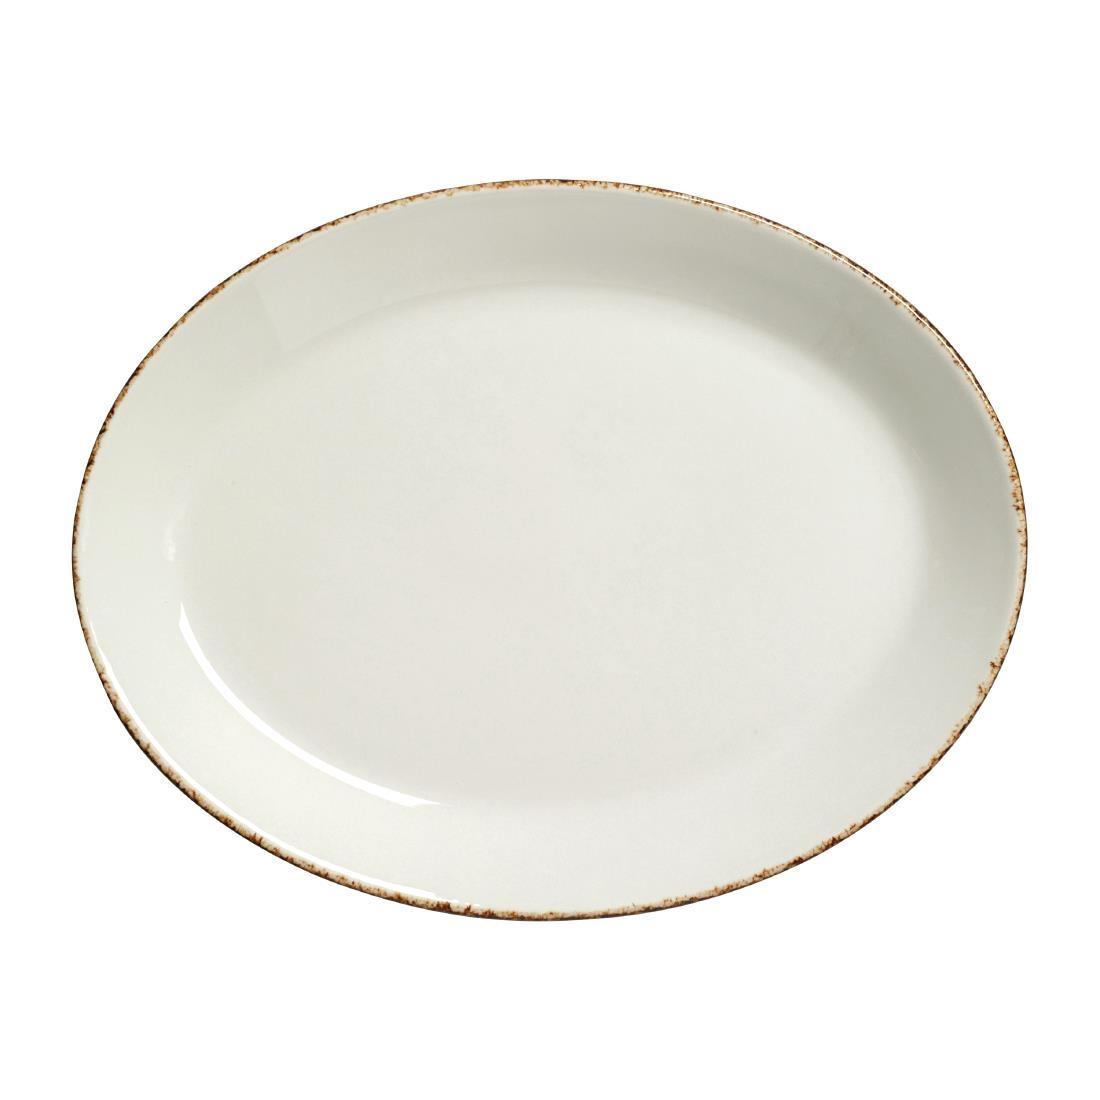 Steelite Brown Dapple Oval Coupe Plates 202mm (Pack of 24) - VV1315  - 1